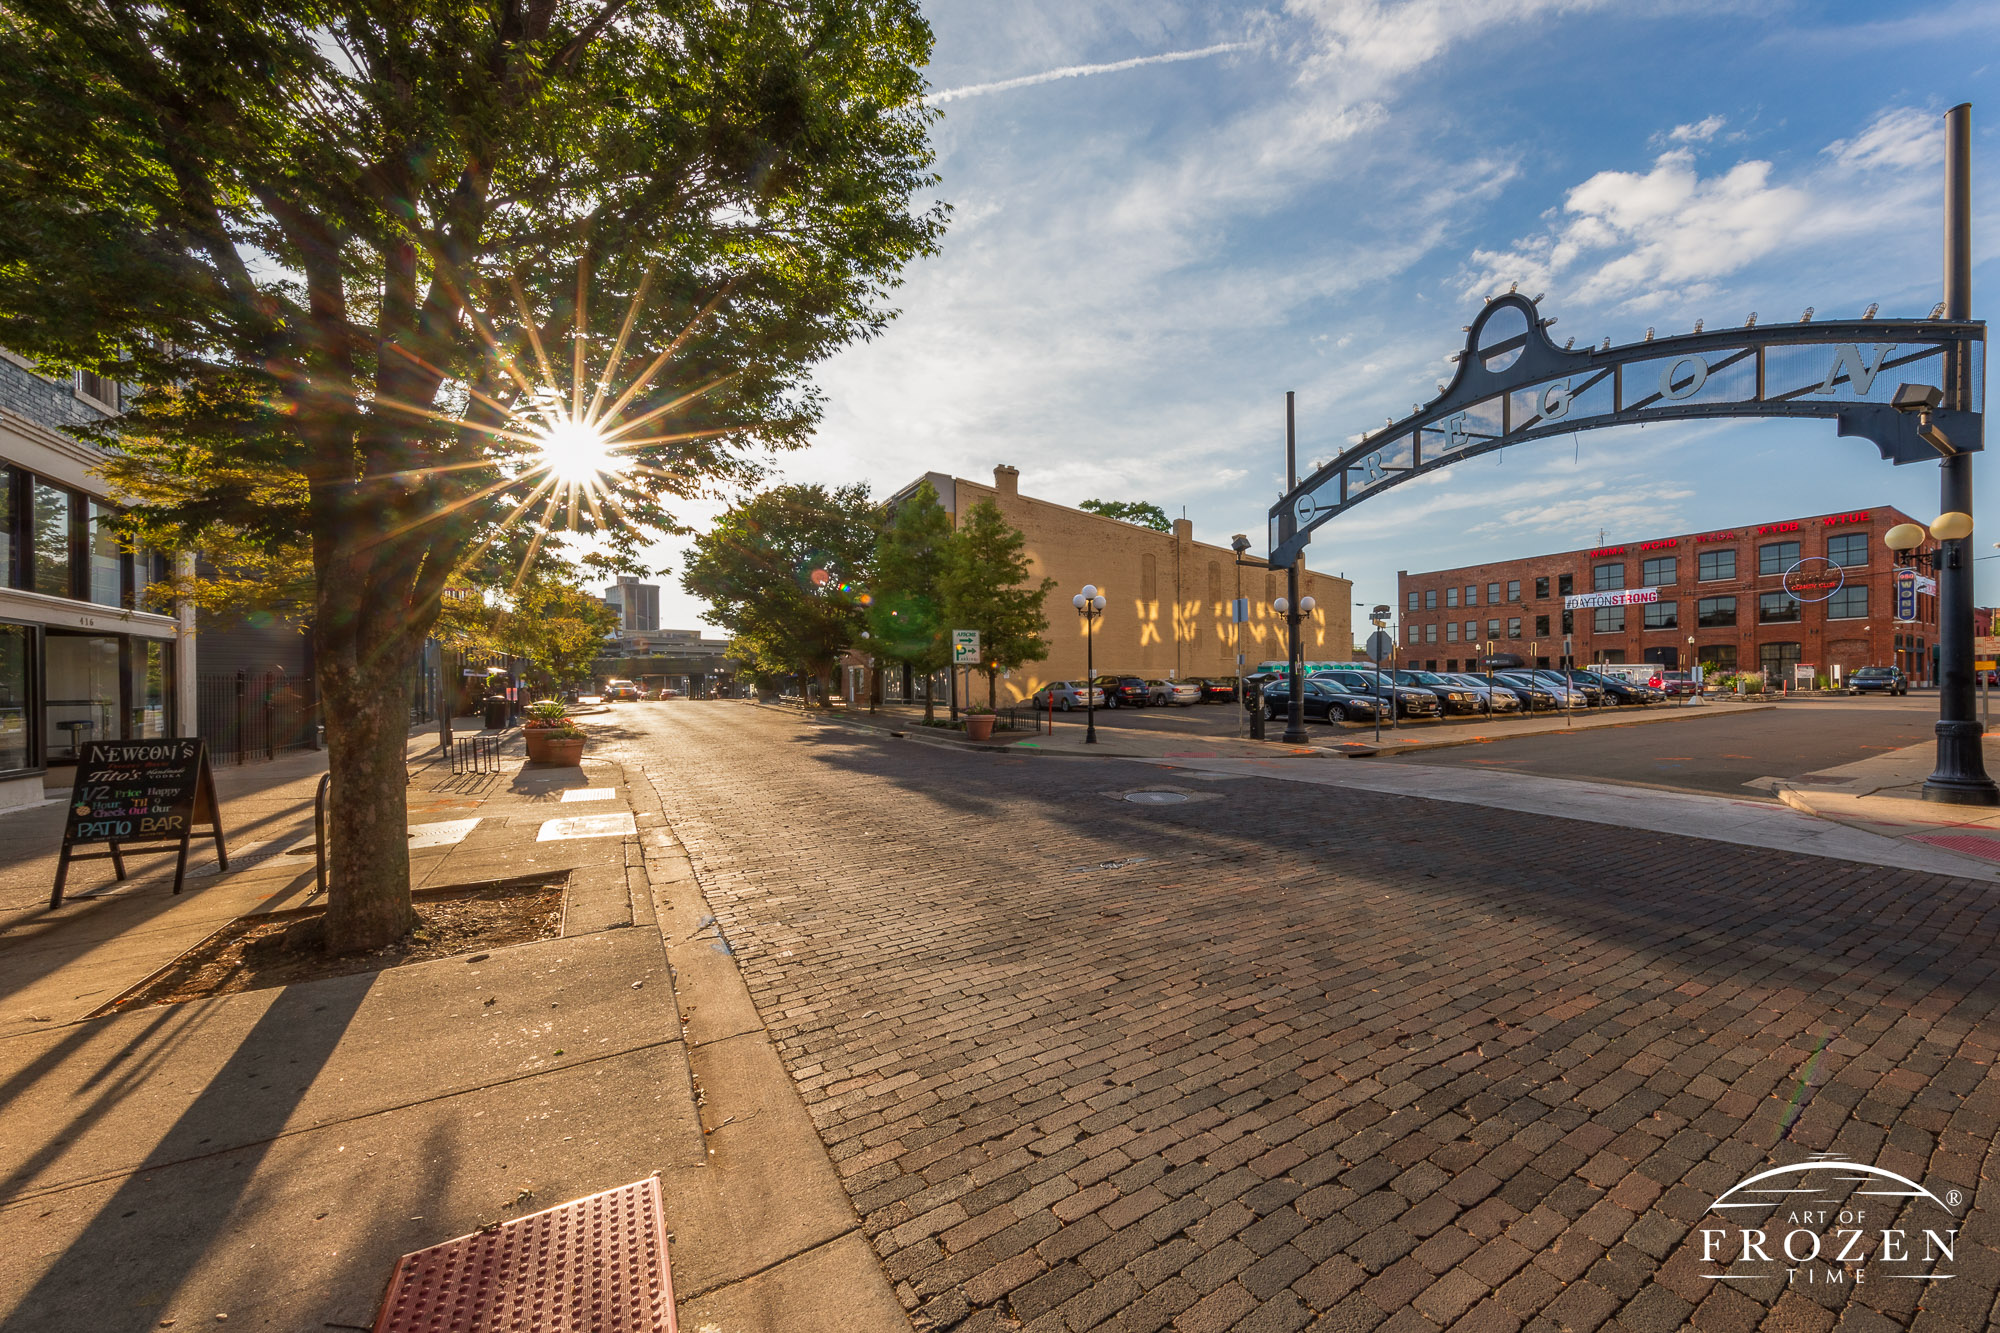 On this summer evening, the sun’s warm rays paint the architectural gem in golden light as the district’s iconic arch sign stands proudly over the brick-paved street